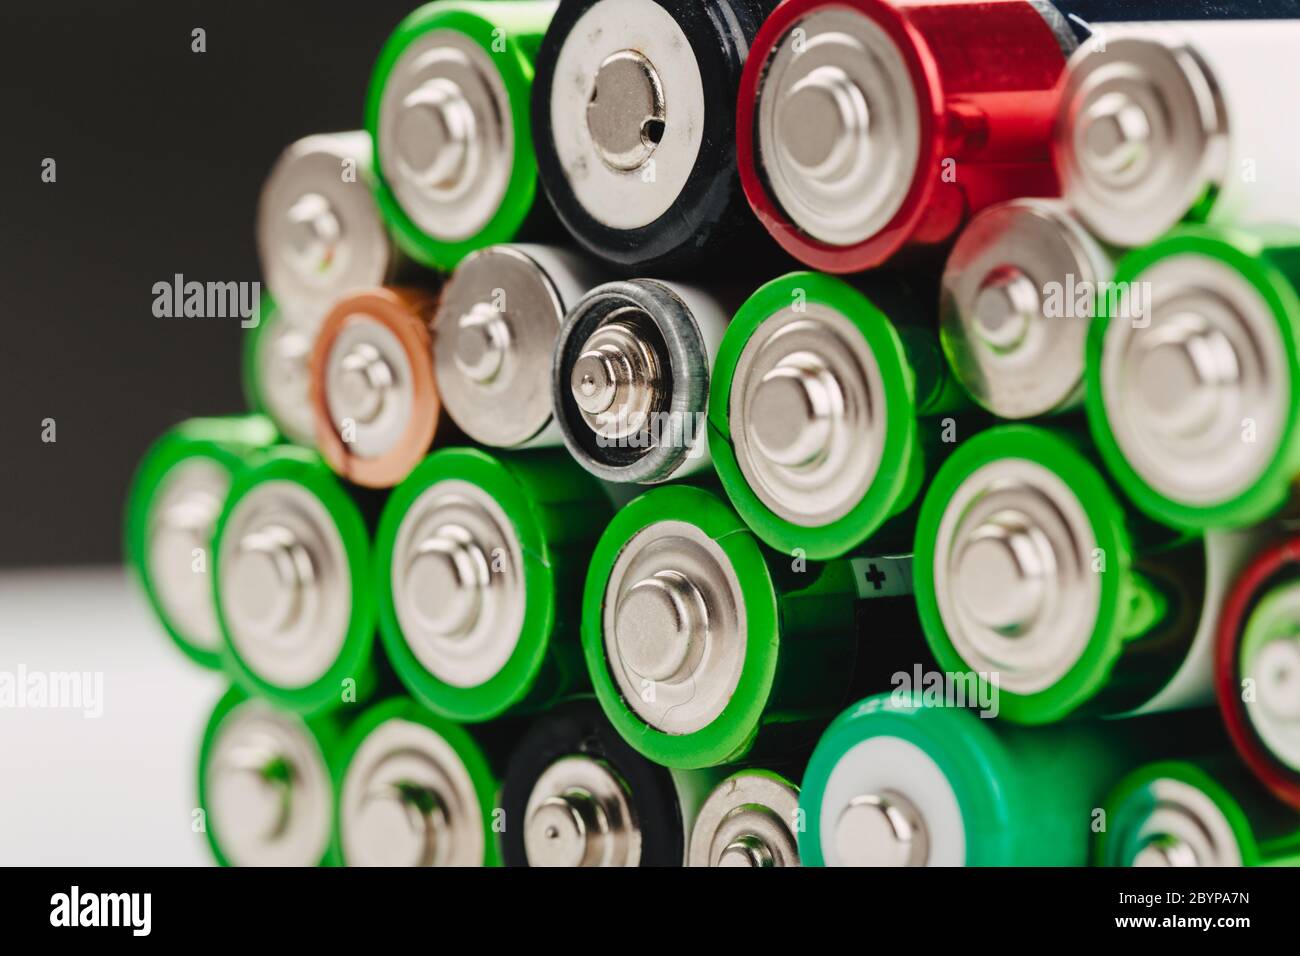 Closeup of group of used disposable AA batteries of various color. Stock Photo